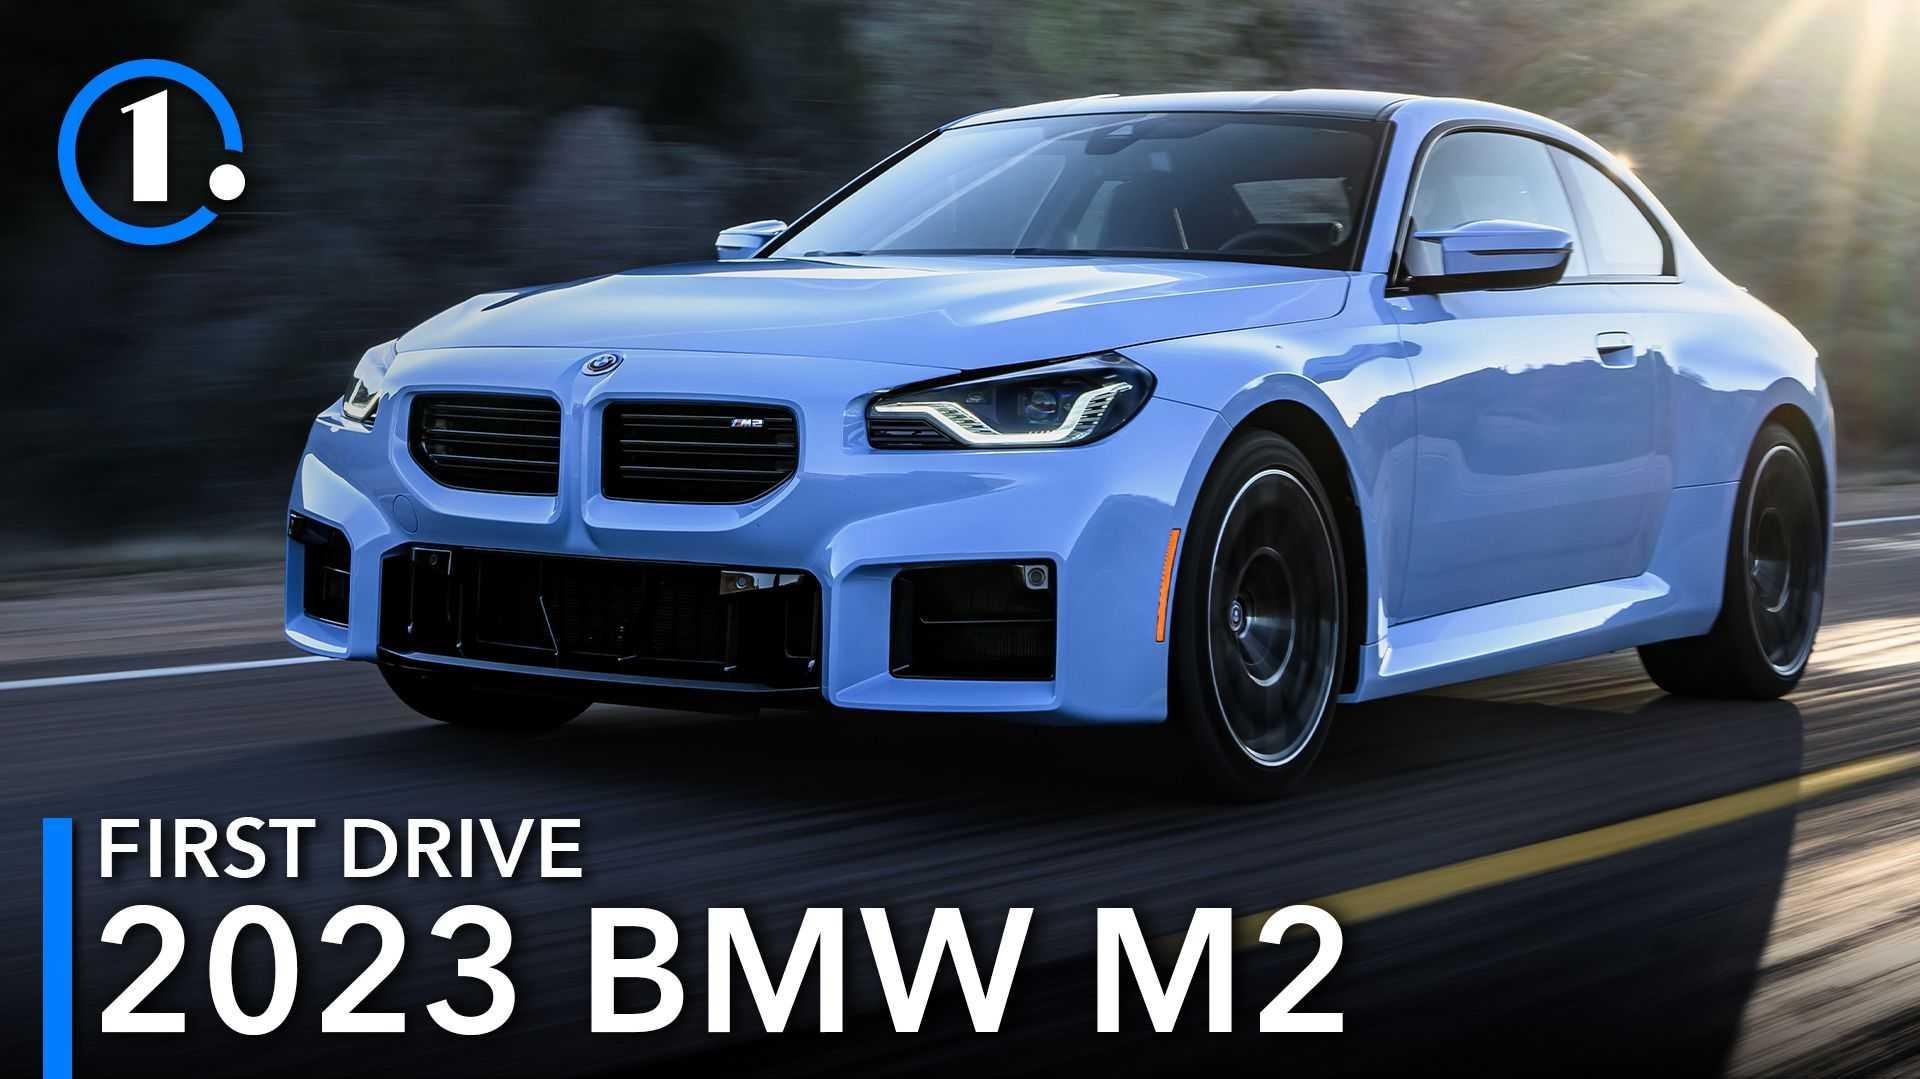 Bmw M2 First Drive Re Too Much Or Just Right